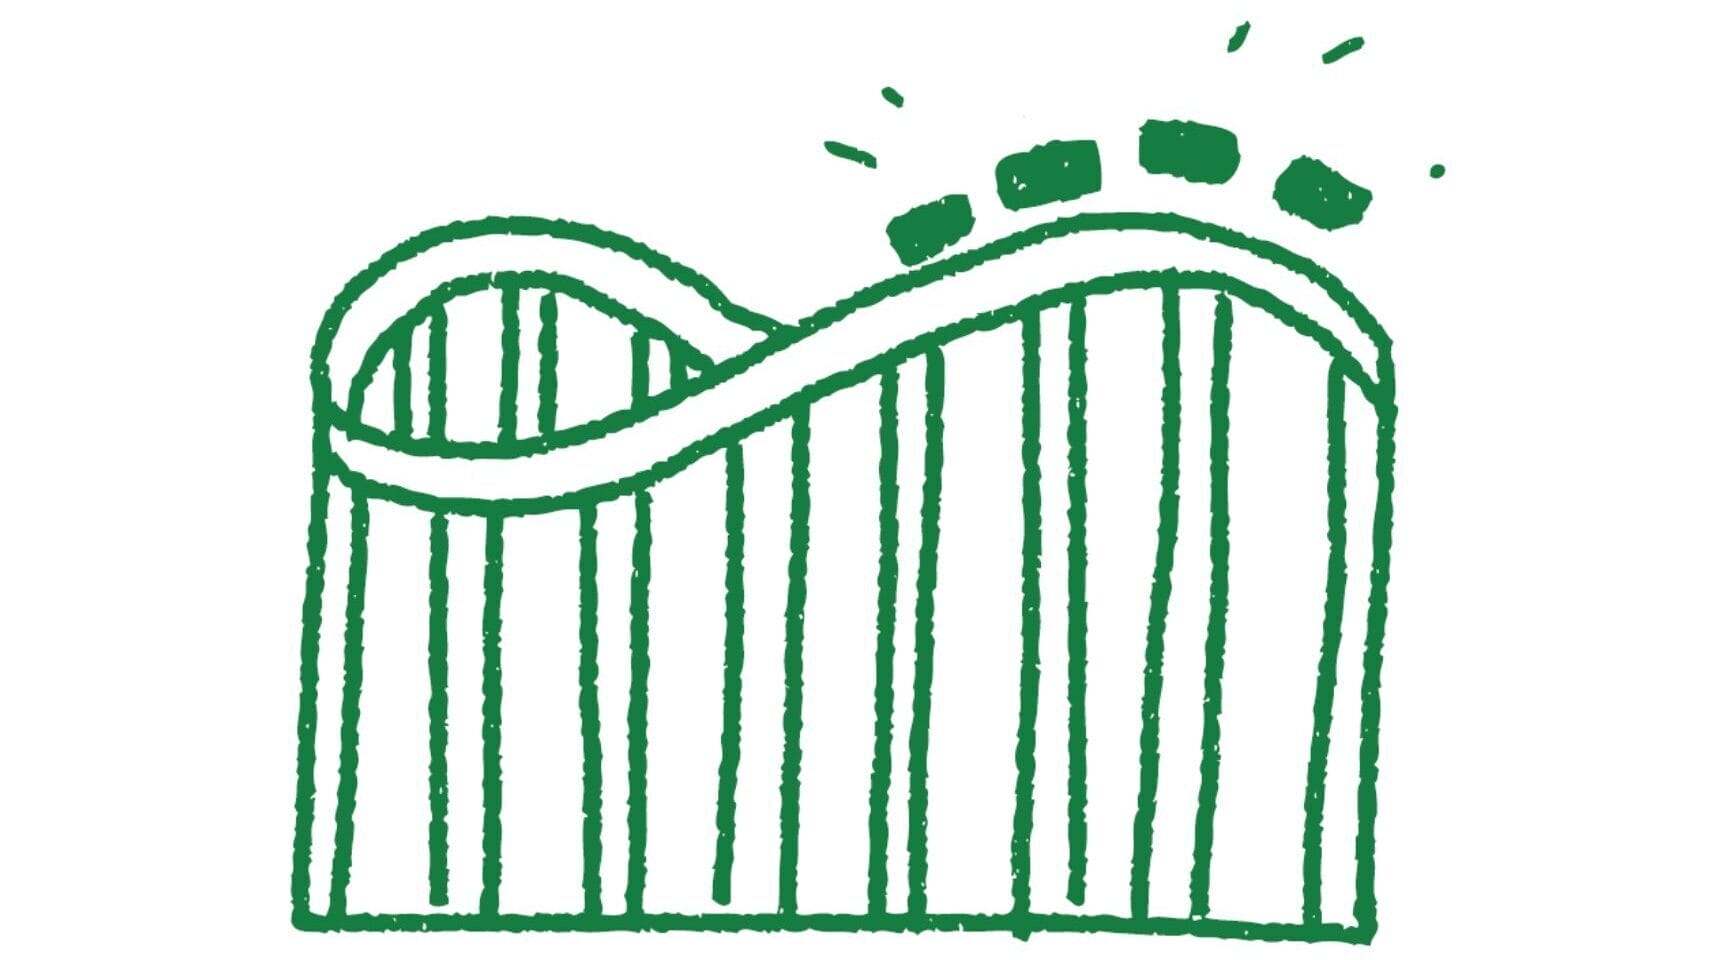 A simply illustrated rollercoaster in green.